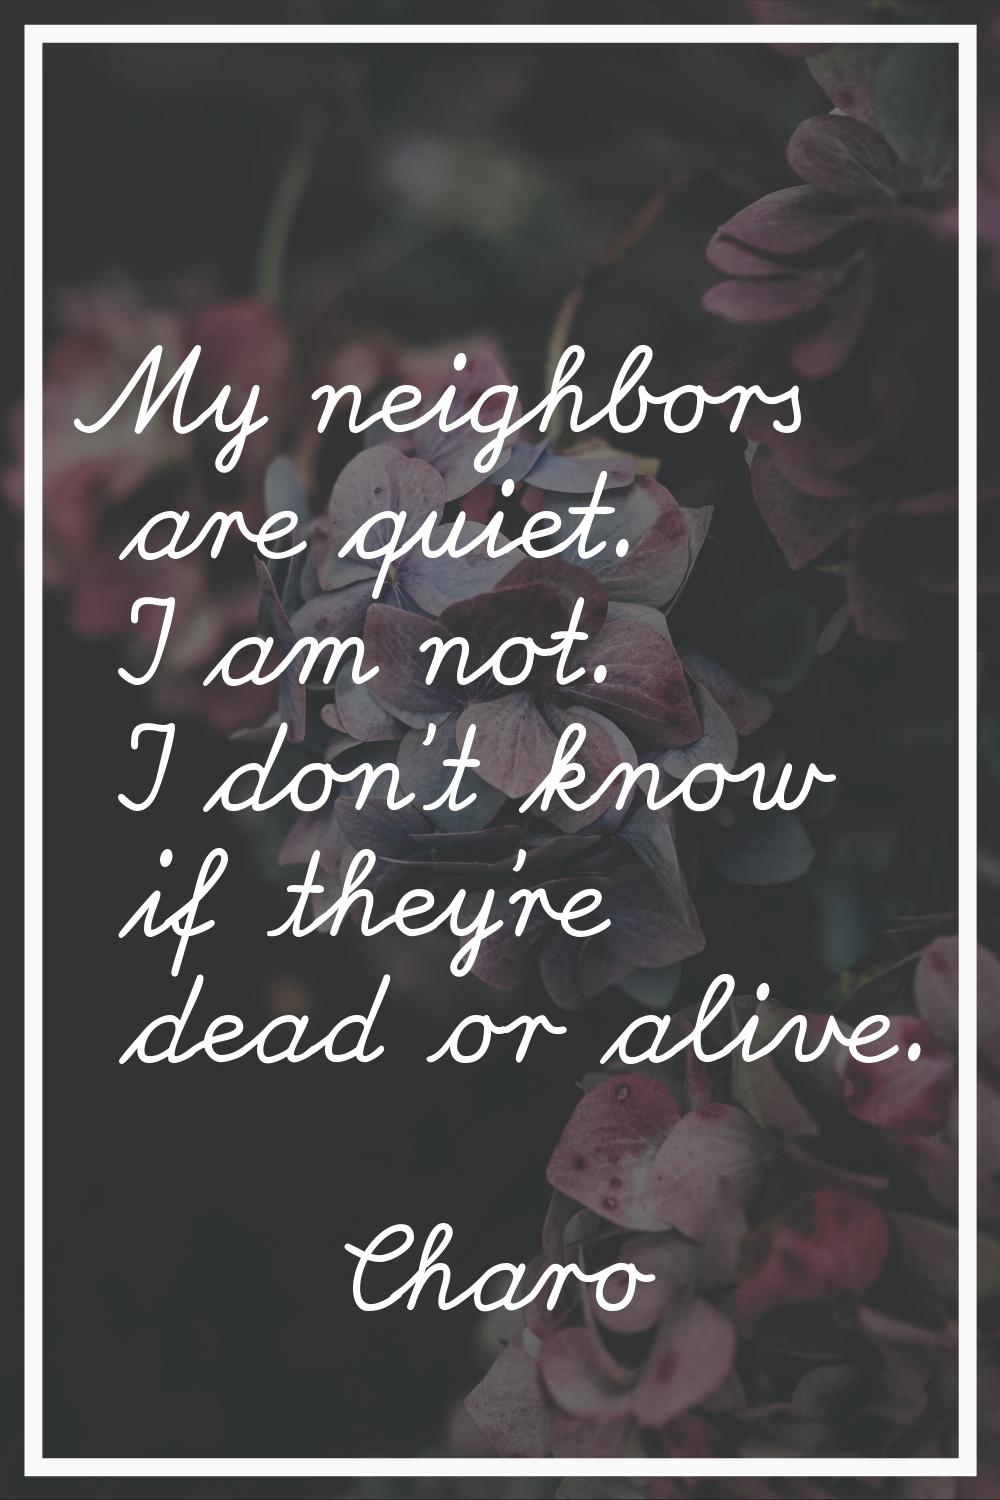 My neighbors are quiet. I am not. I don't know if they're dead or alive.